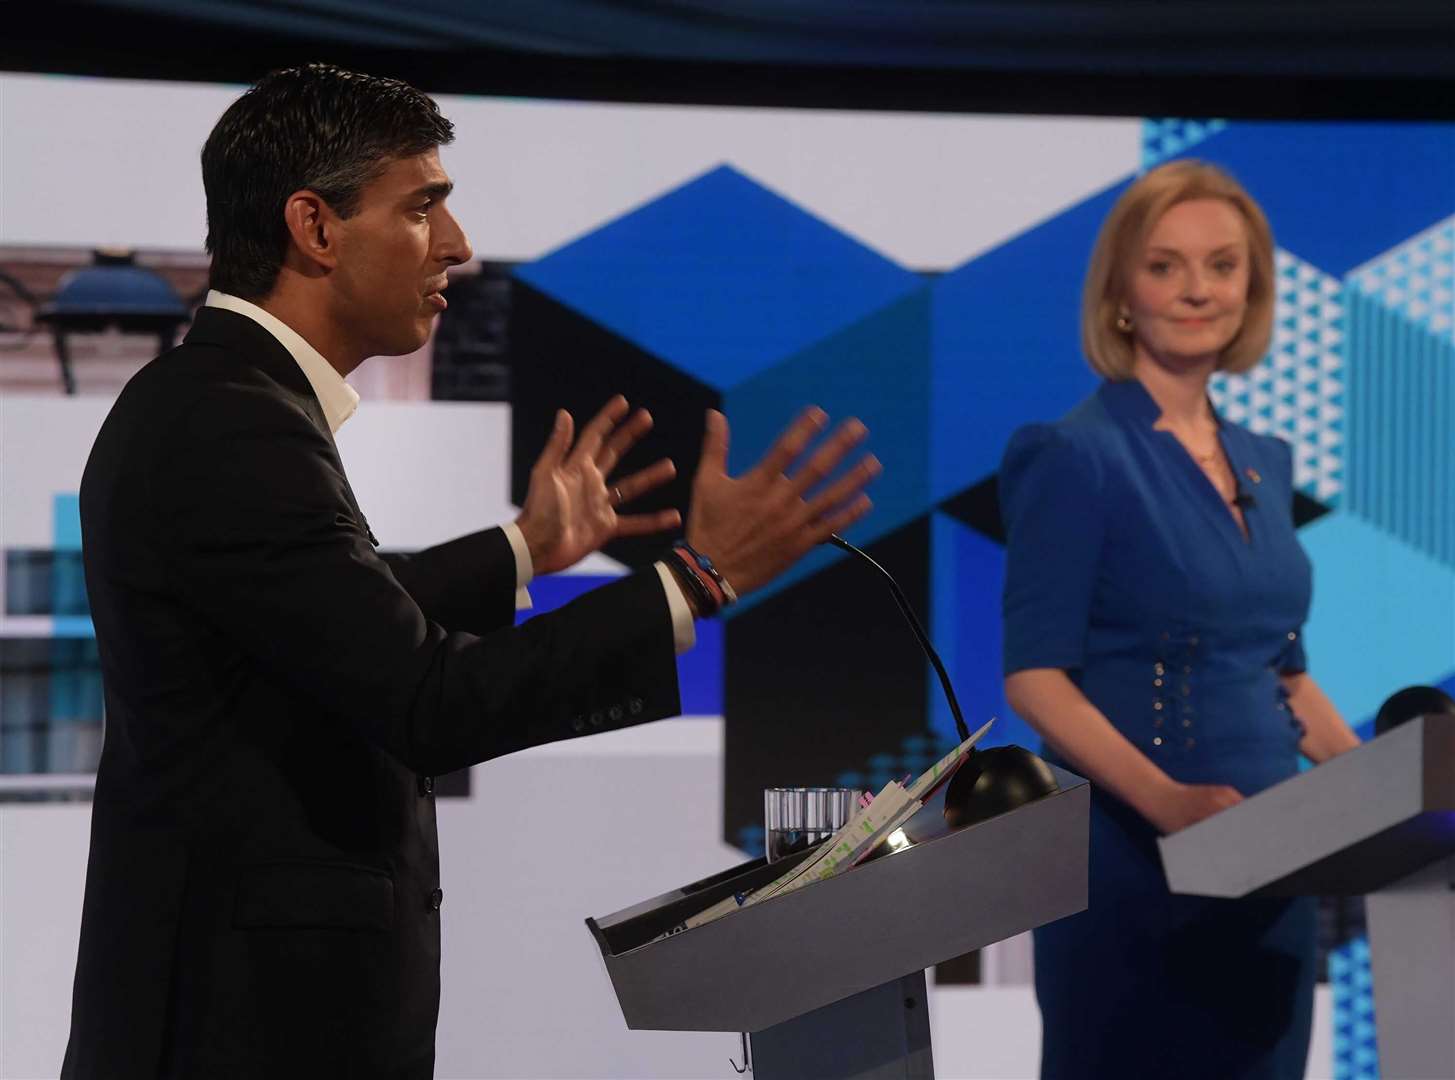 Rishi Sunak and Liz Truss clashed heavily over the issue of China during the BBC1 Conservative leadership debate on Monday (Jeff Overs/BBC/PA)